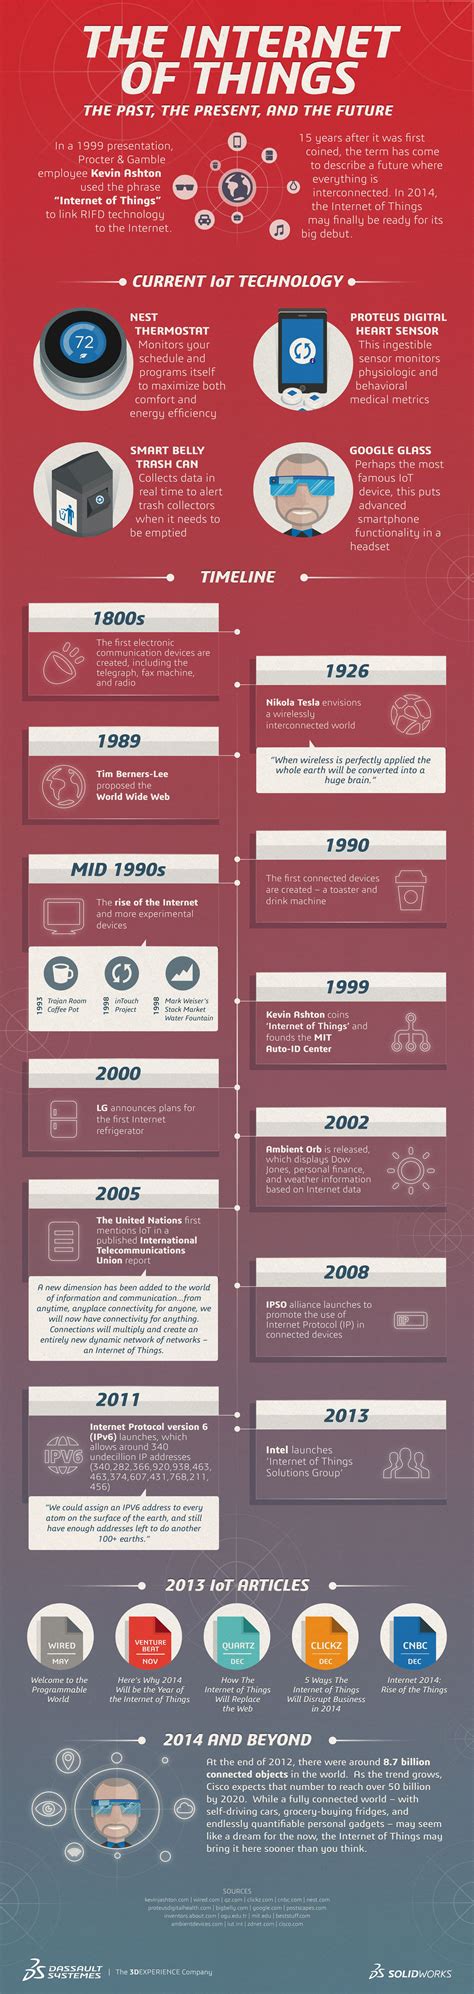 The Internet Of Things: The Past, The Present, And The Future [Infographic] | Iot, Infographic ...